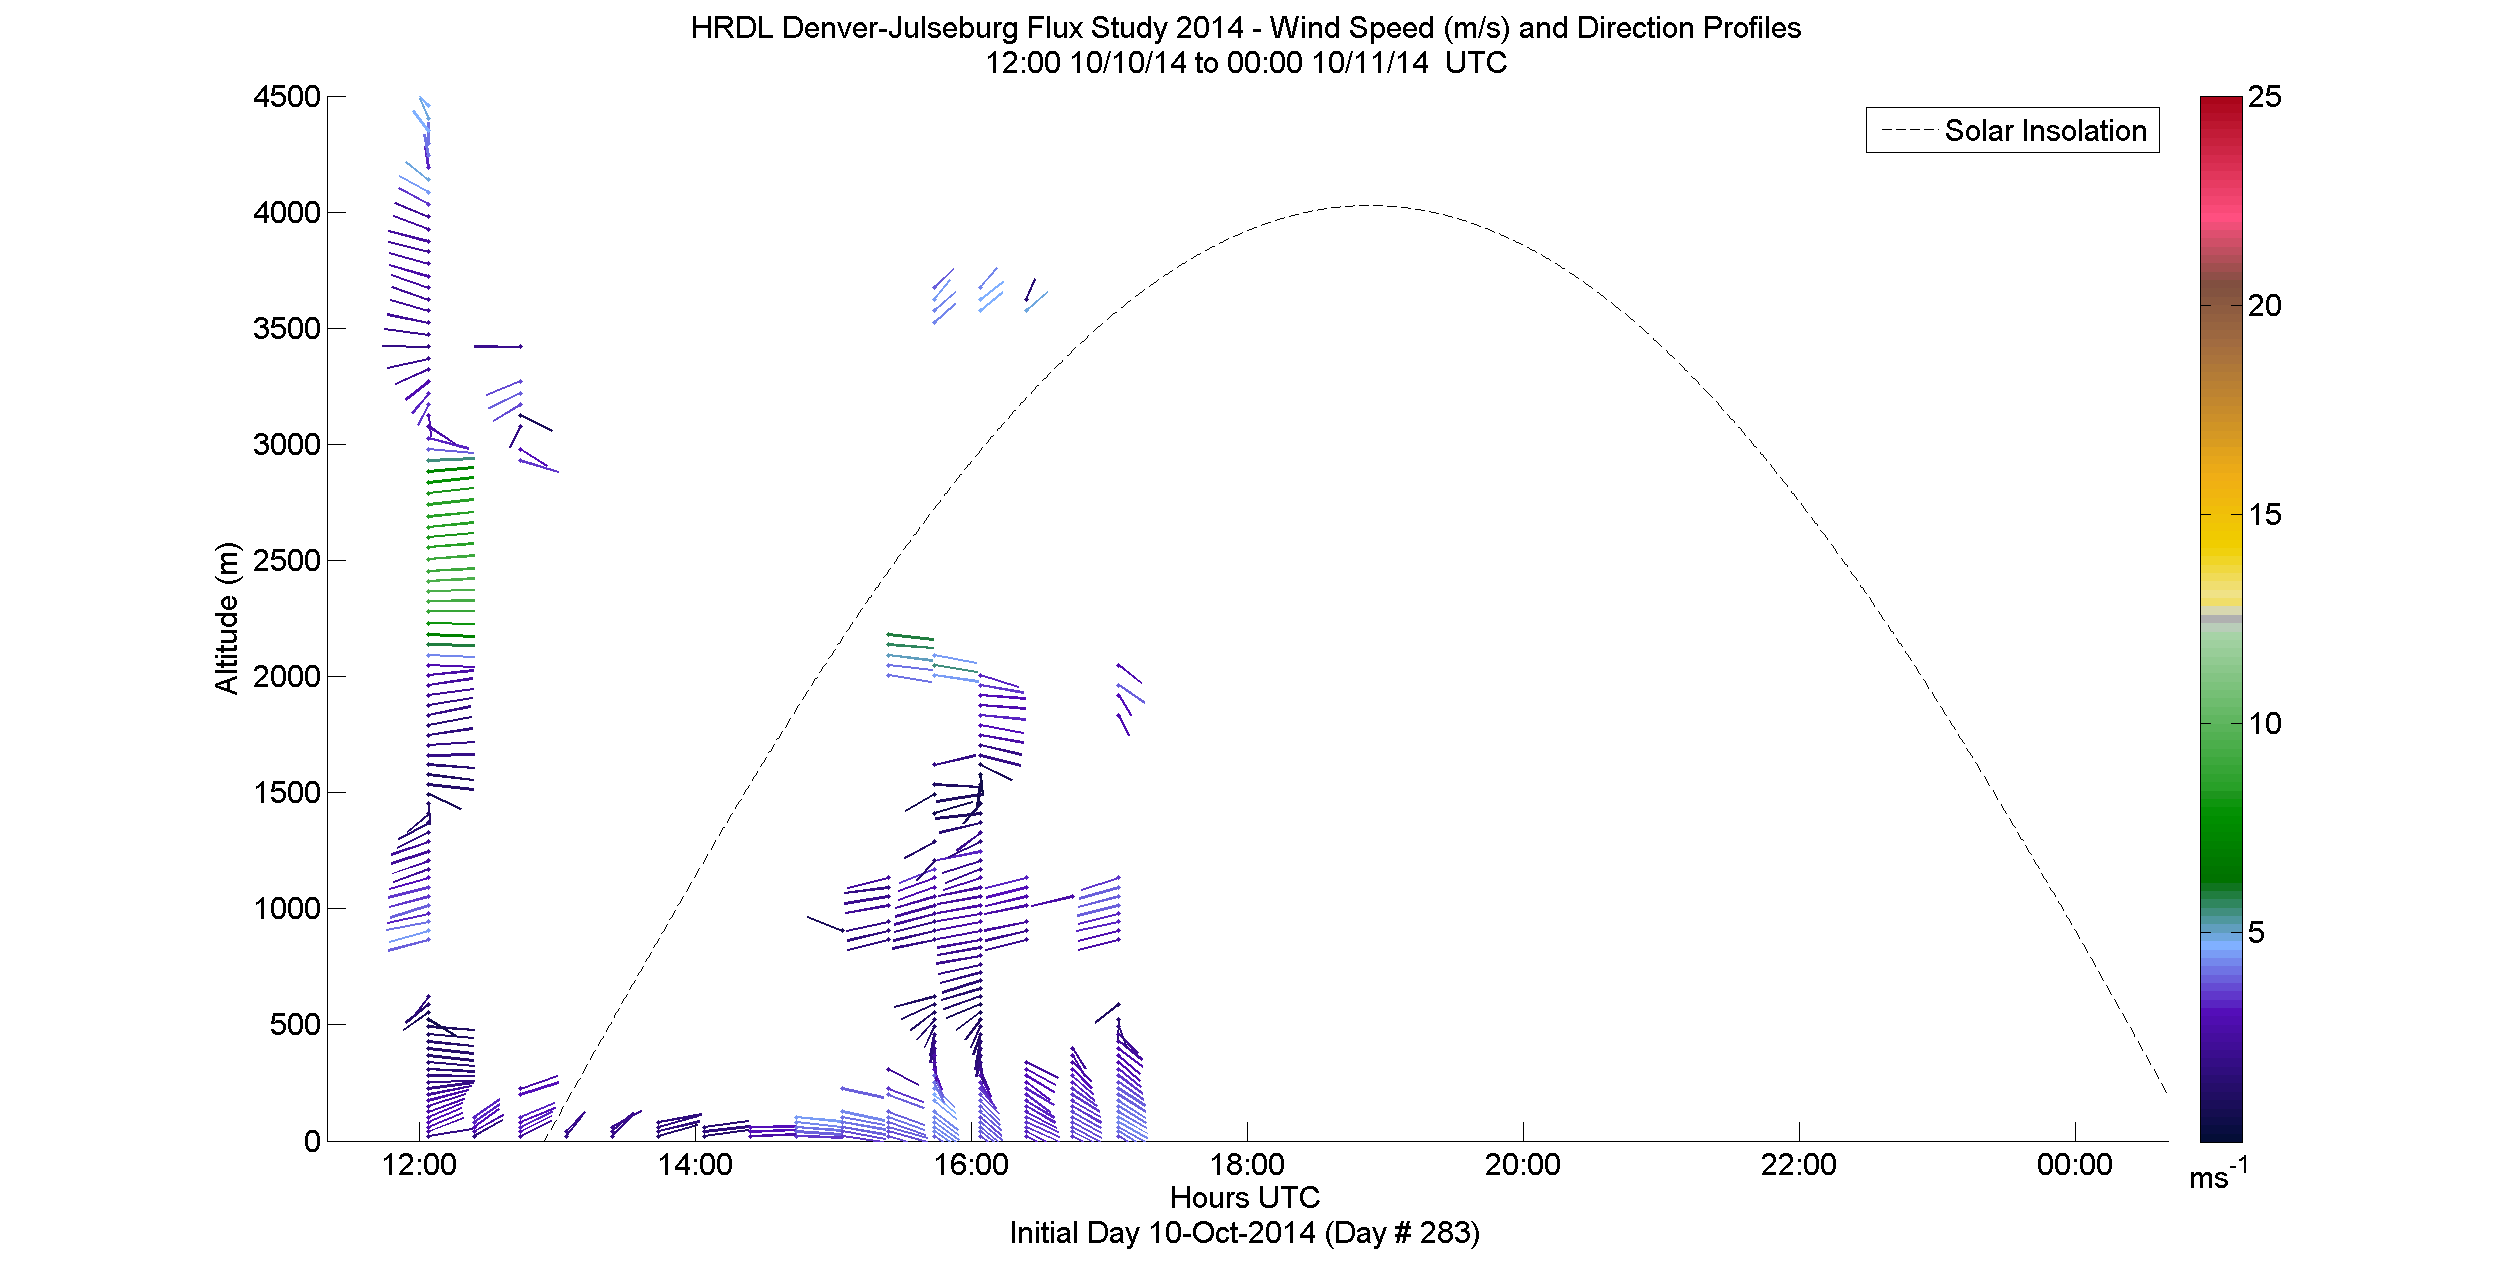 HRDL speed and direction profile - October 10 pm